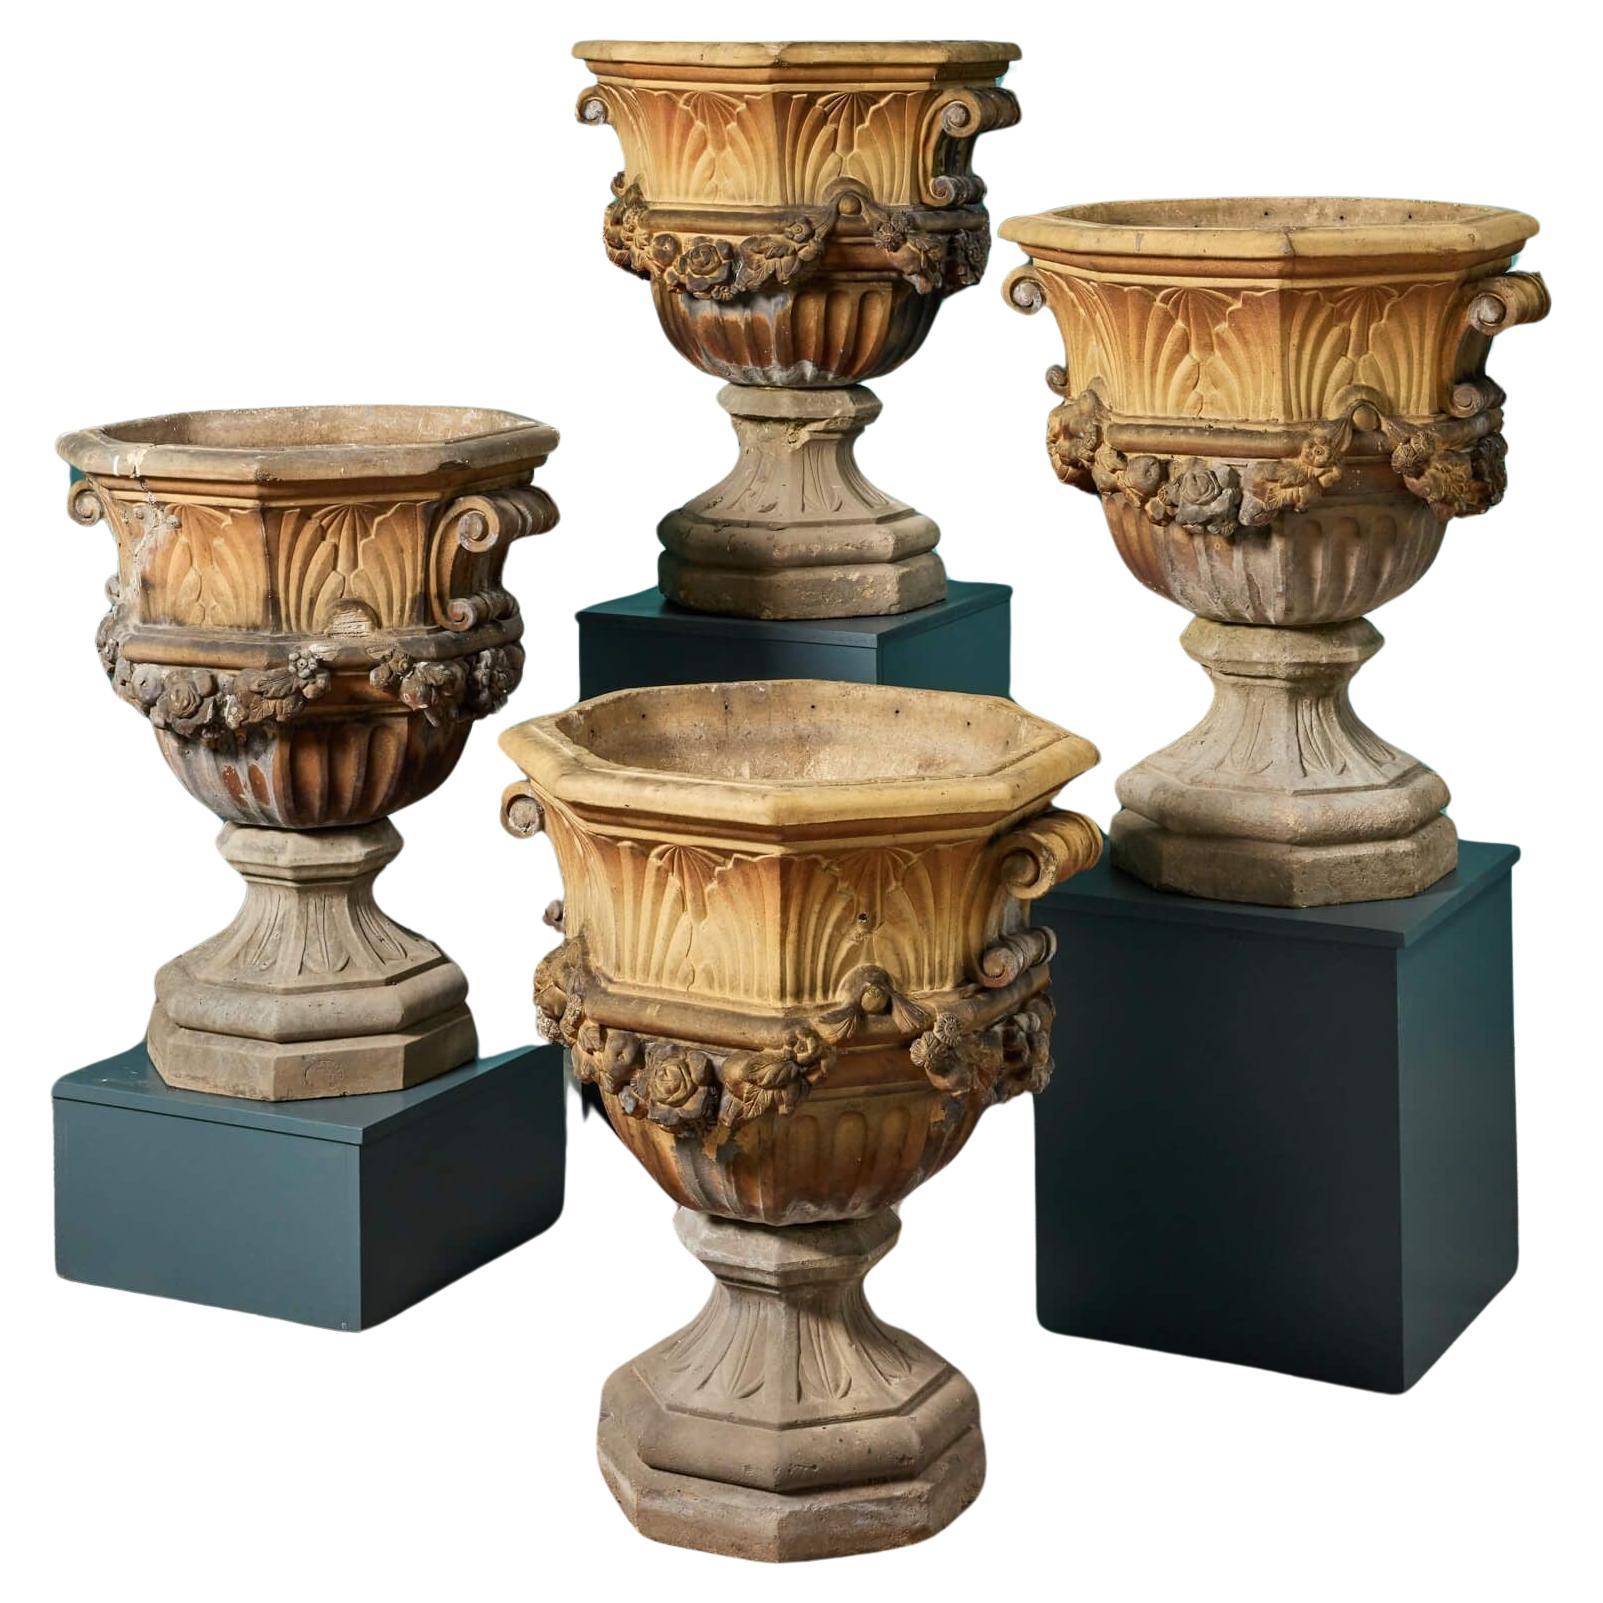 Rare Set of 4 Large English Antique Terracotta Garden Urns For Sale